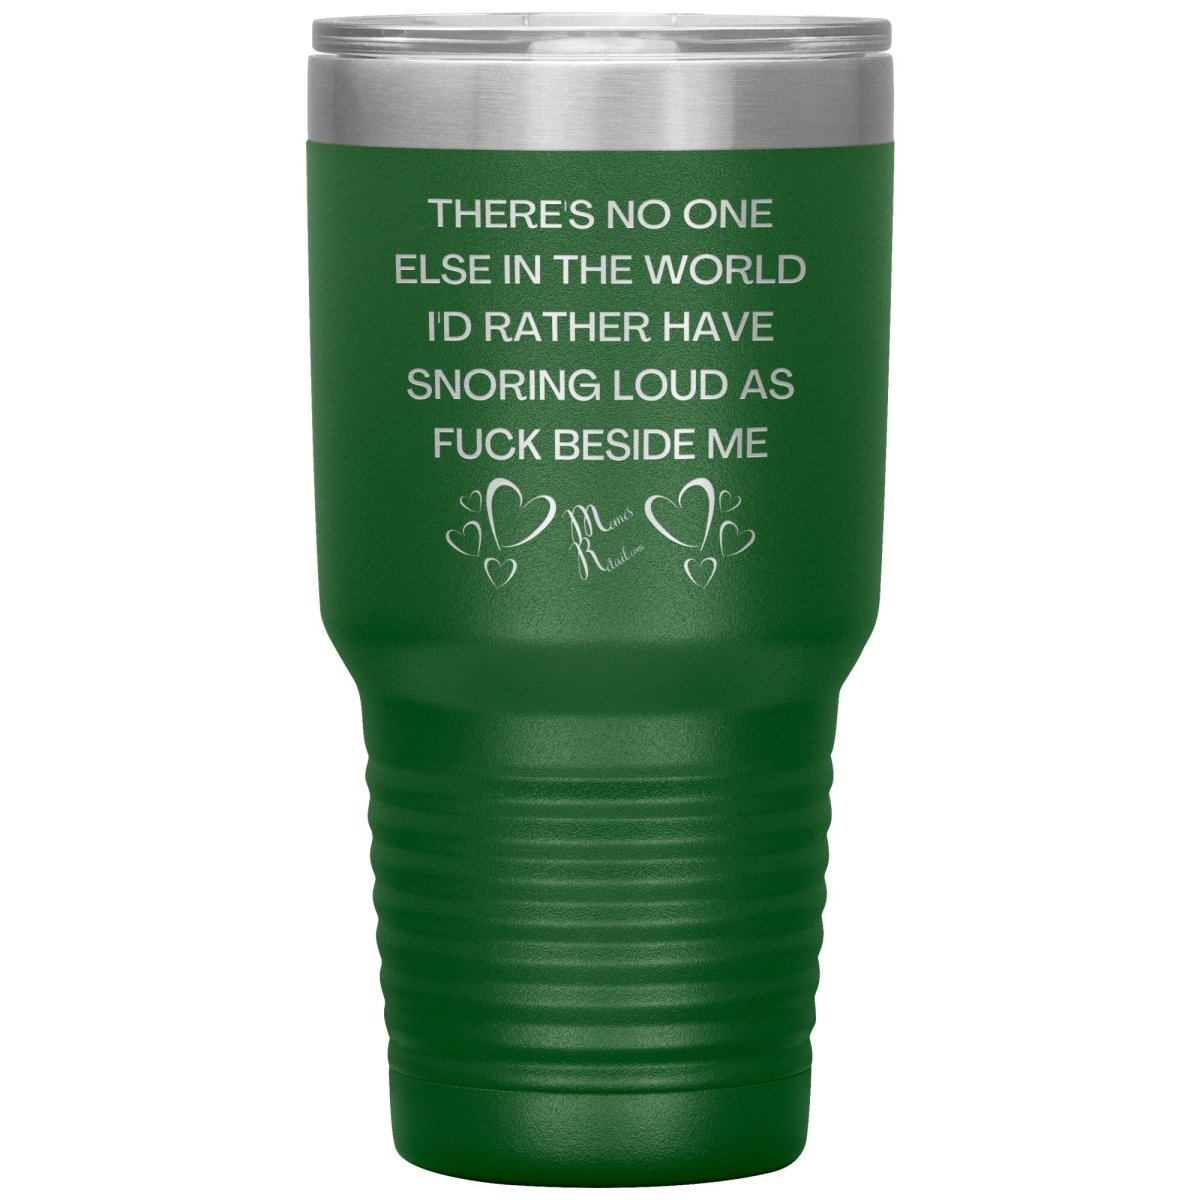 There's No One Else in the World I'd Rather Have Snoring Loud, 30oz Insulated Tumbler / Green - MemesRetail.com